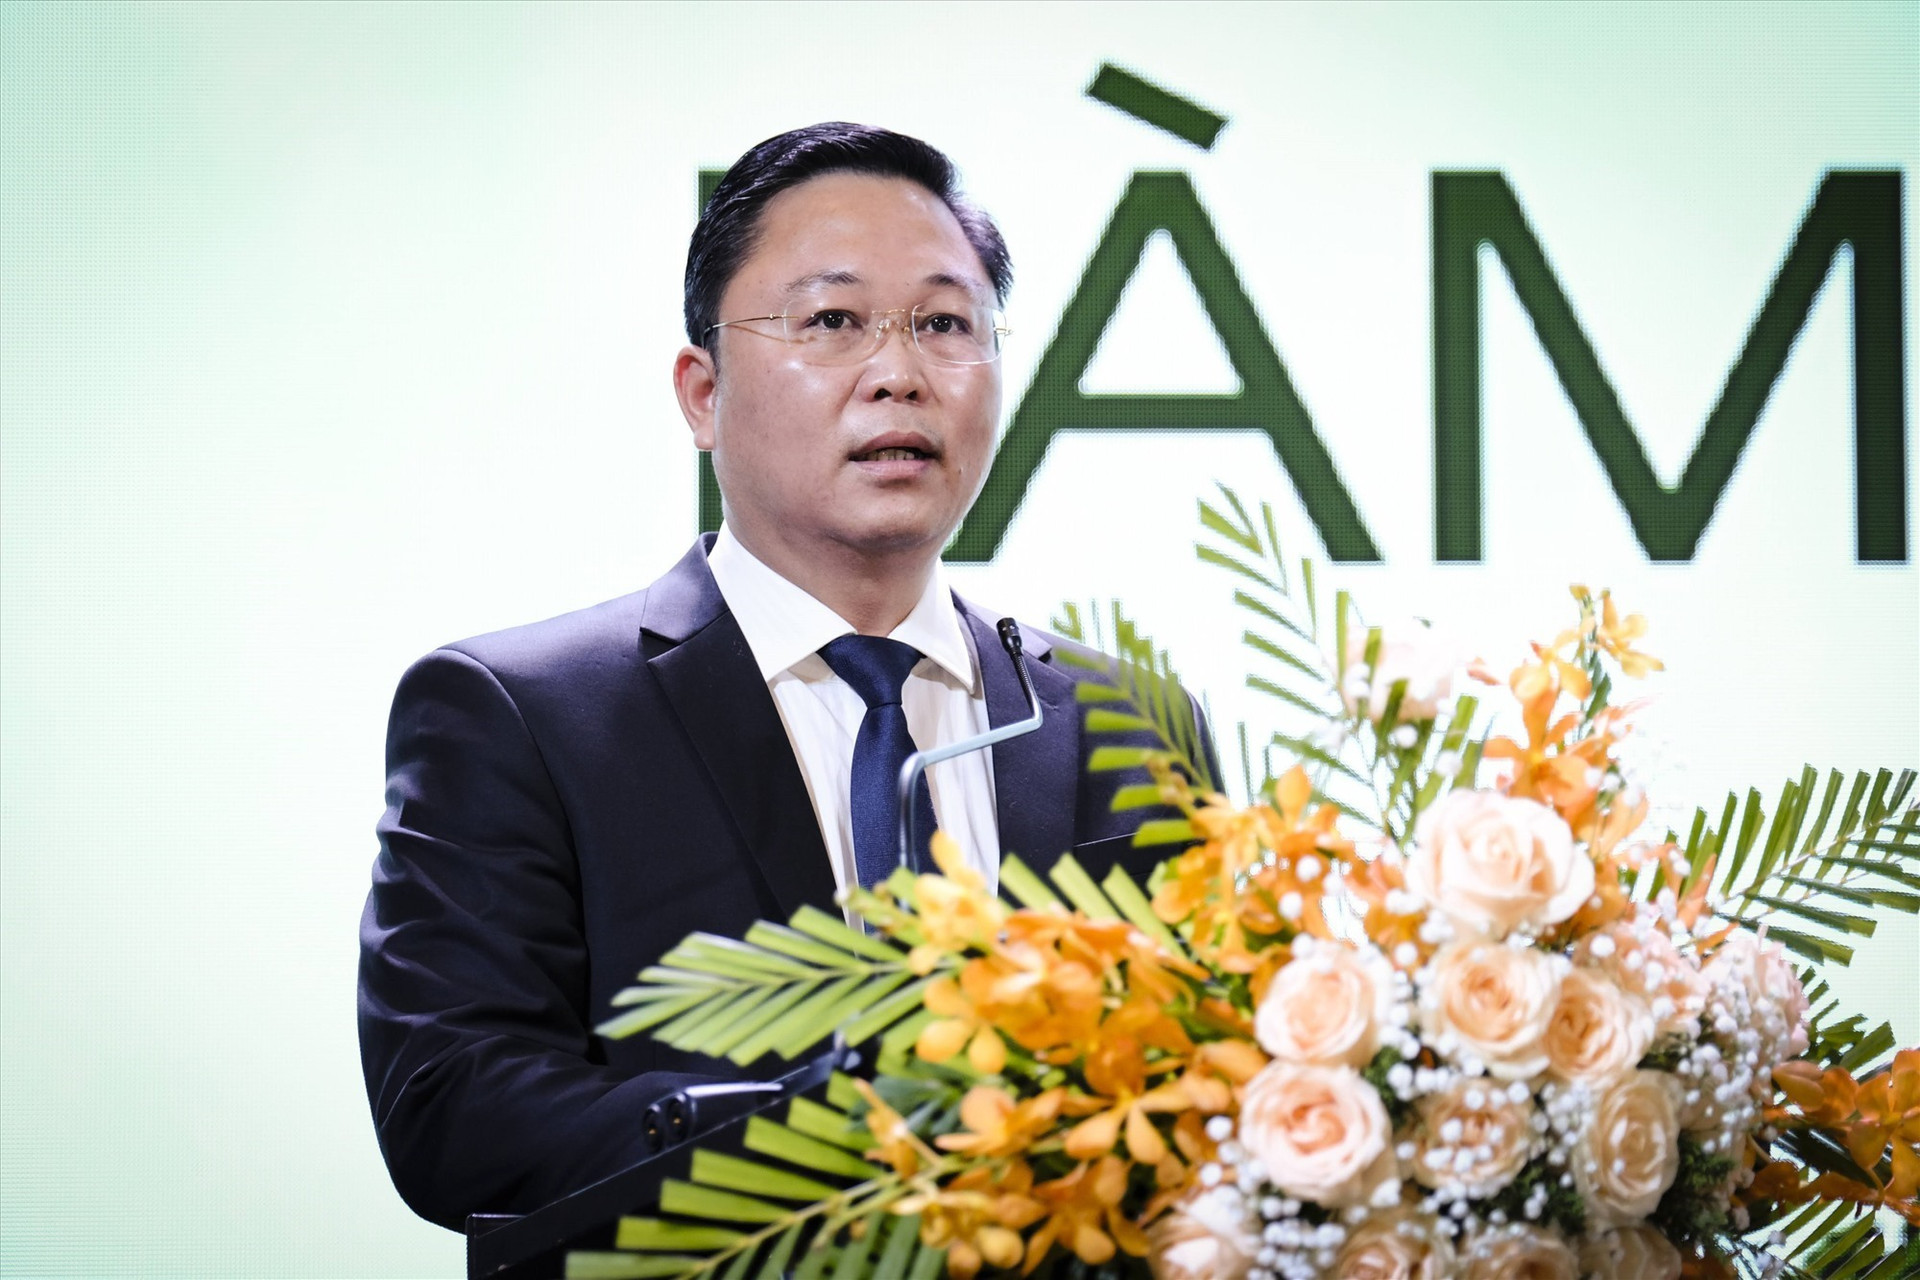 Chairman Le Tri Thanh at the symposium